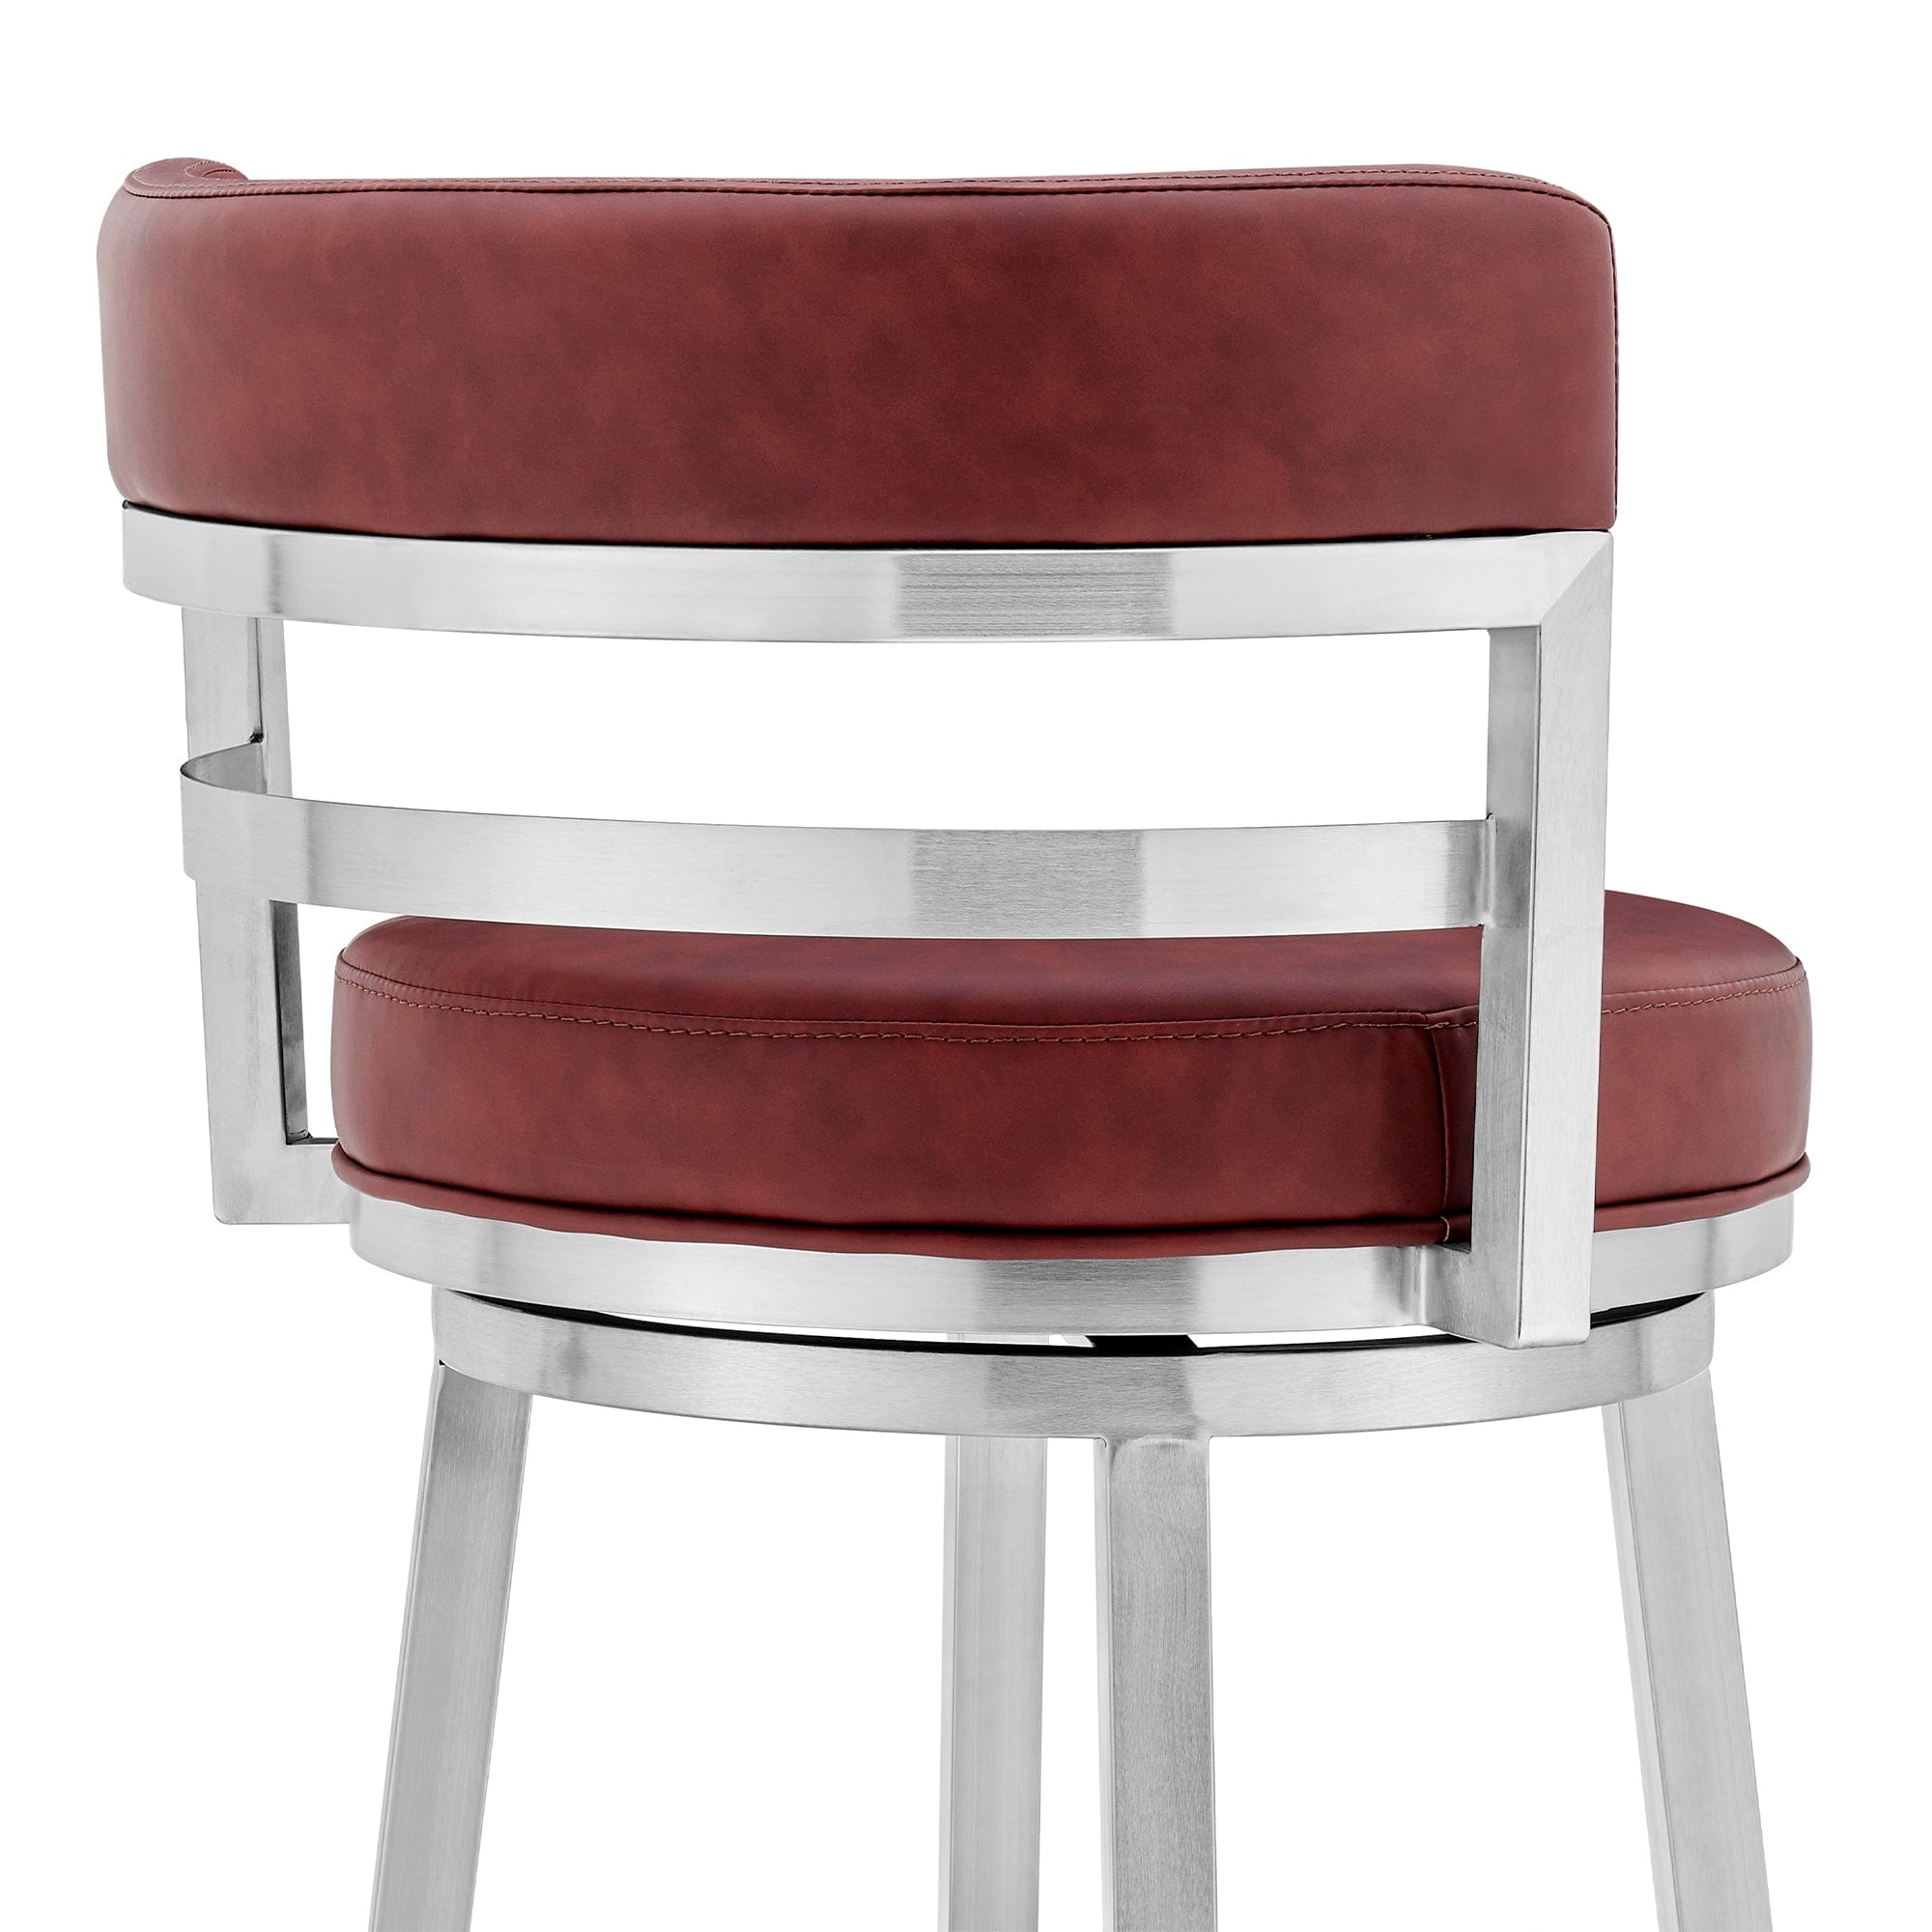 Armen Living Barstool Armen Living | Madrid 30" Bar Height Swivel Red Faux Leather and Brushed Stainless Steel Bar Stool | LCMABABSRED30